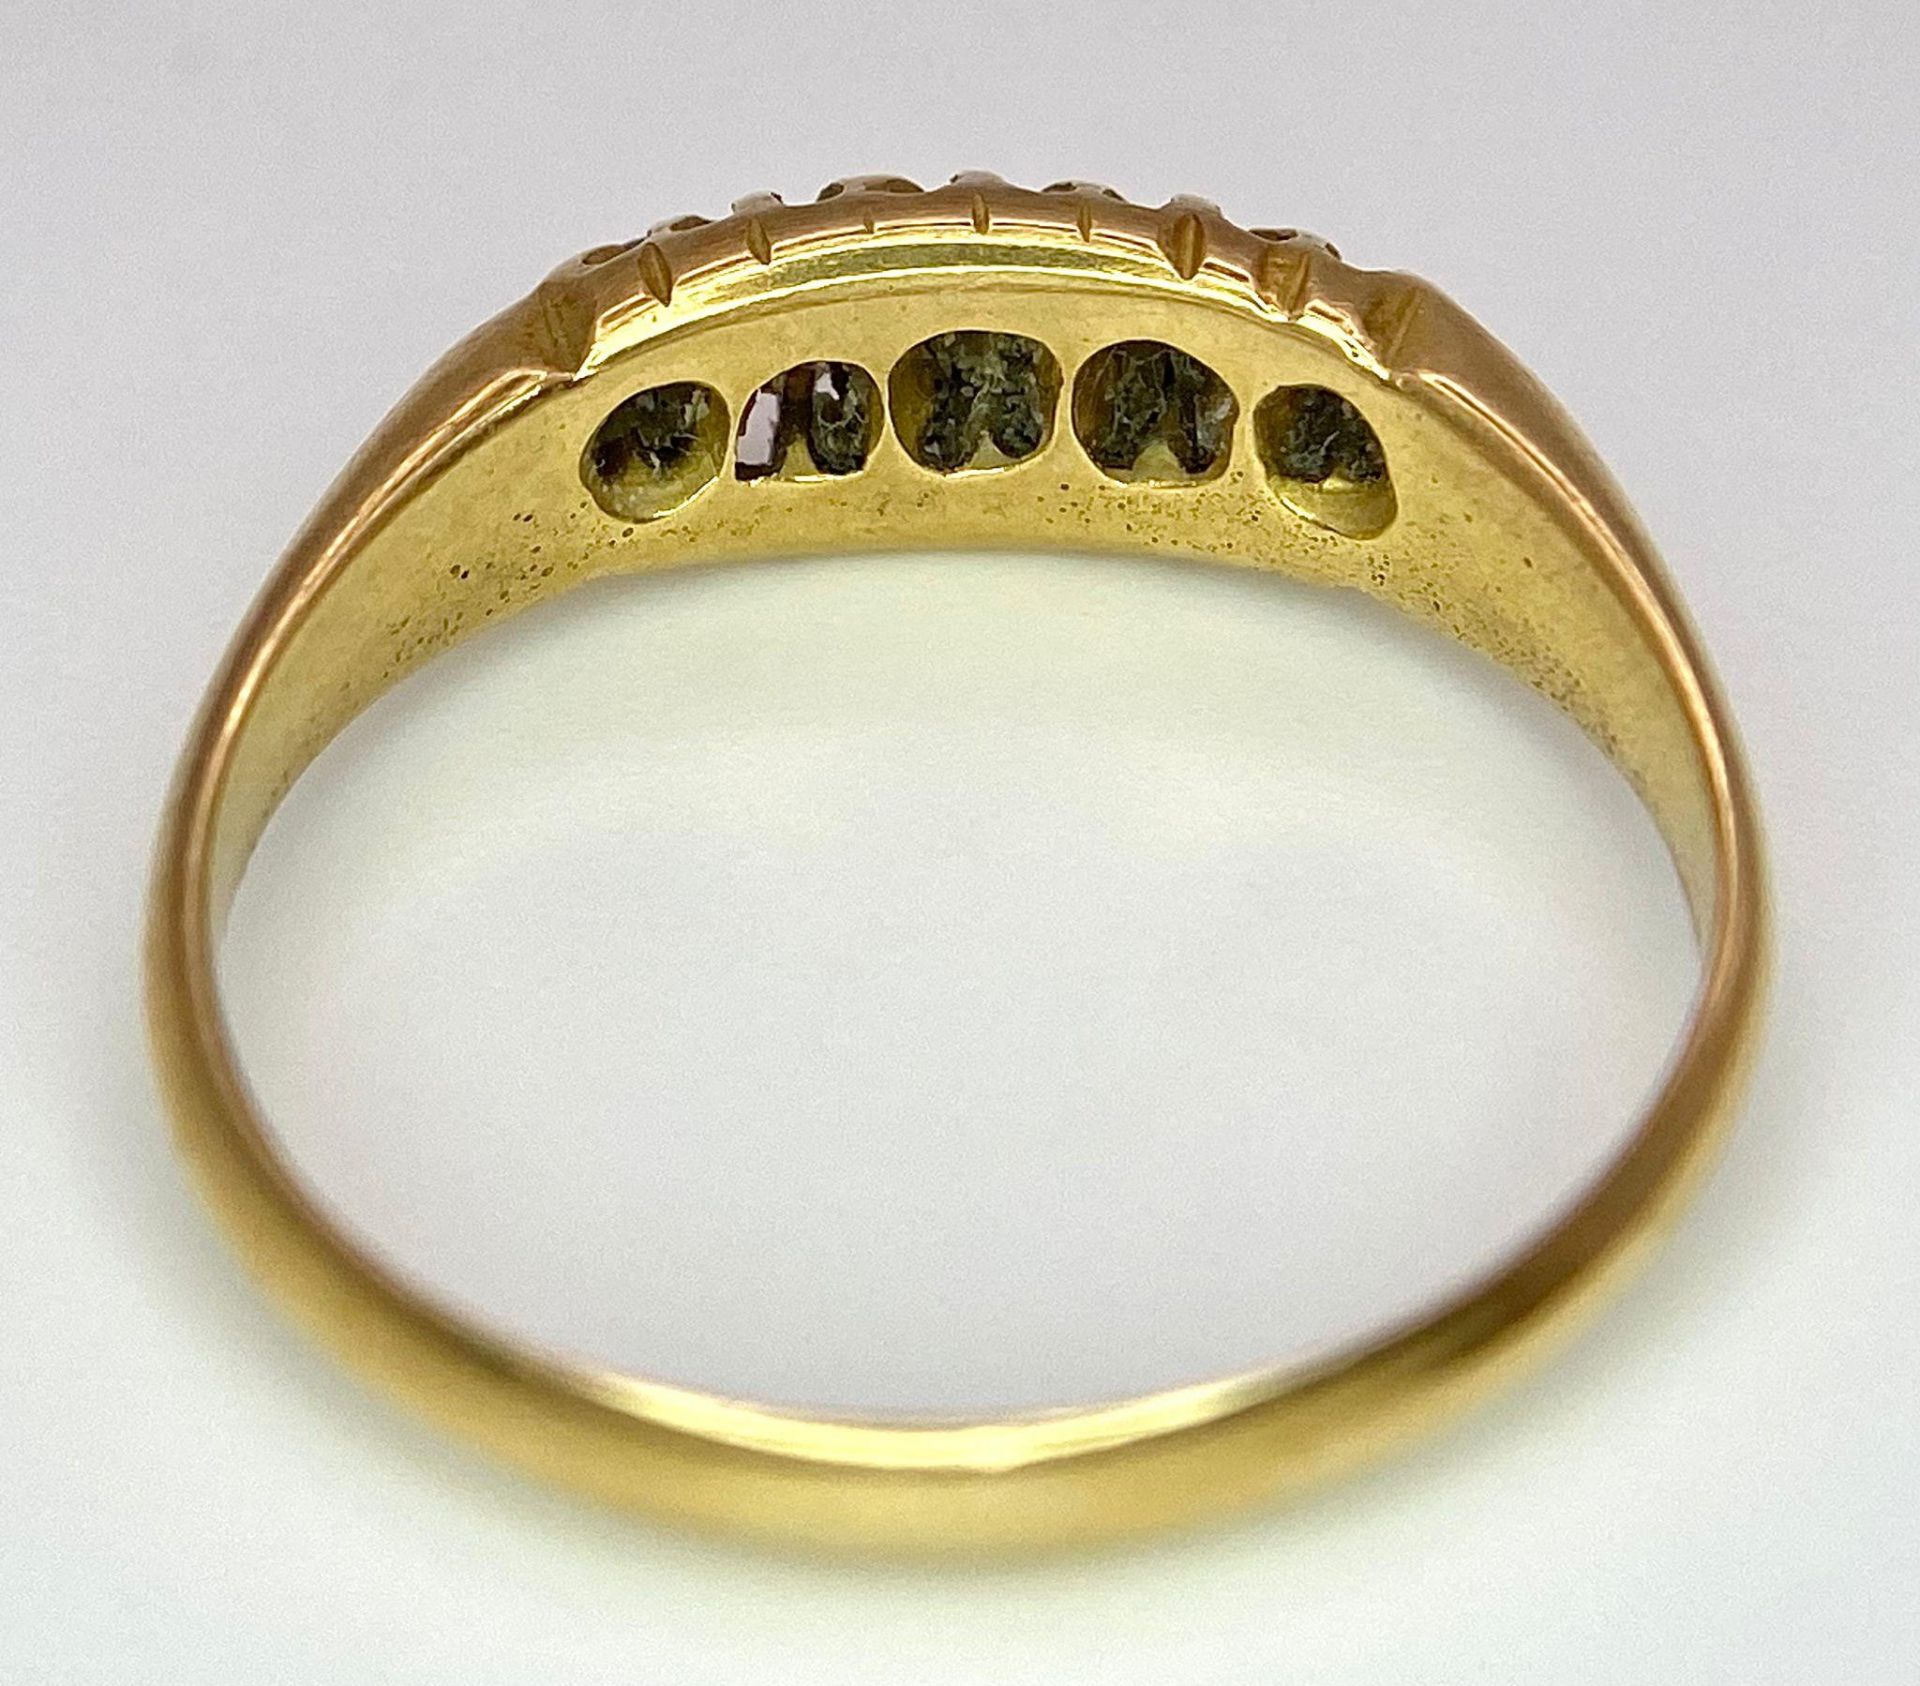 An 18 K yellow gold ring with a band of five diamonds, size: O, weight: 3.2 g. - Image 6 of 7